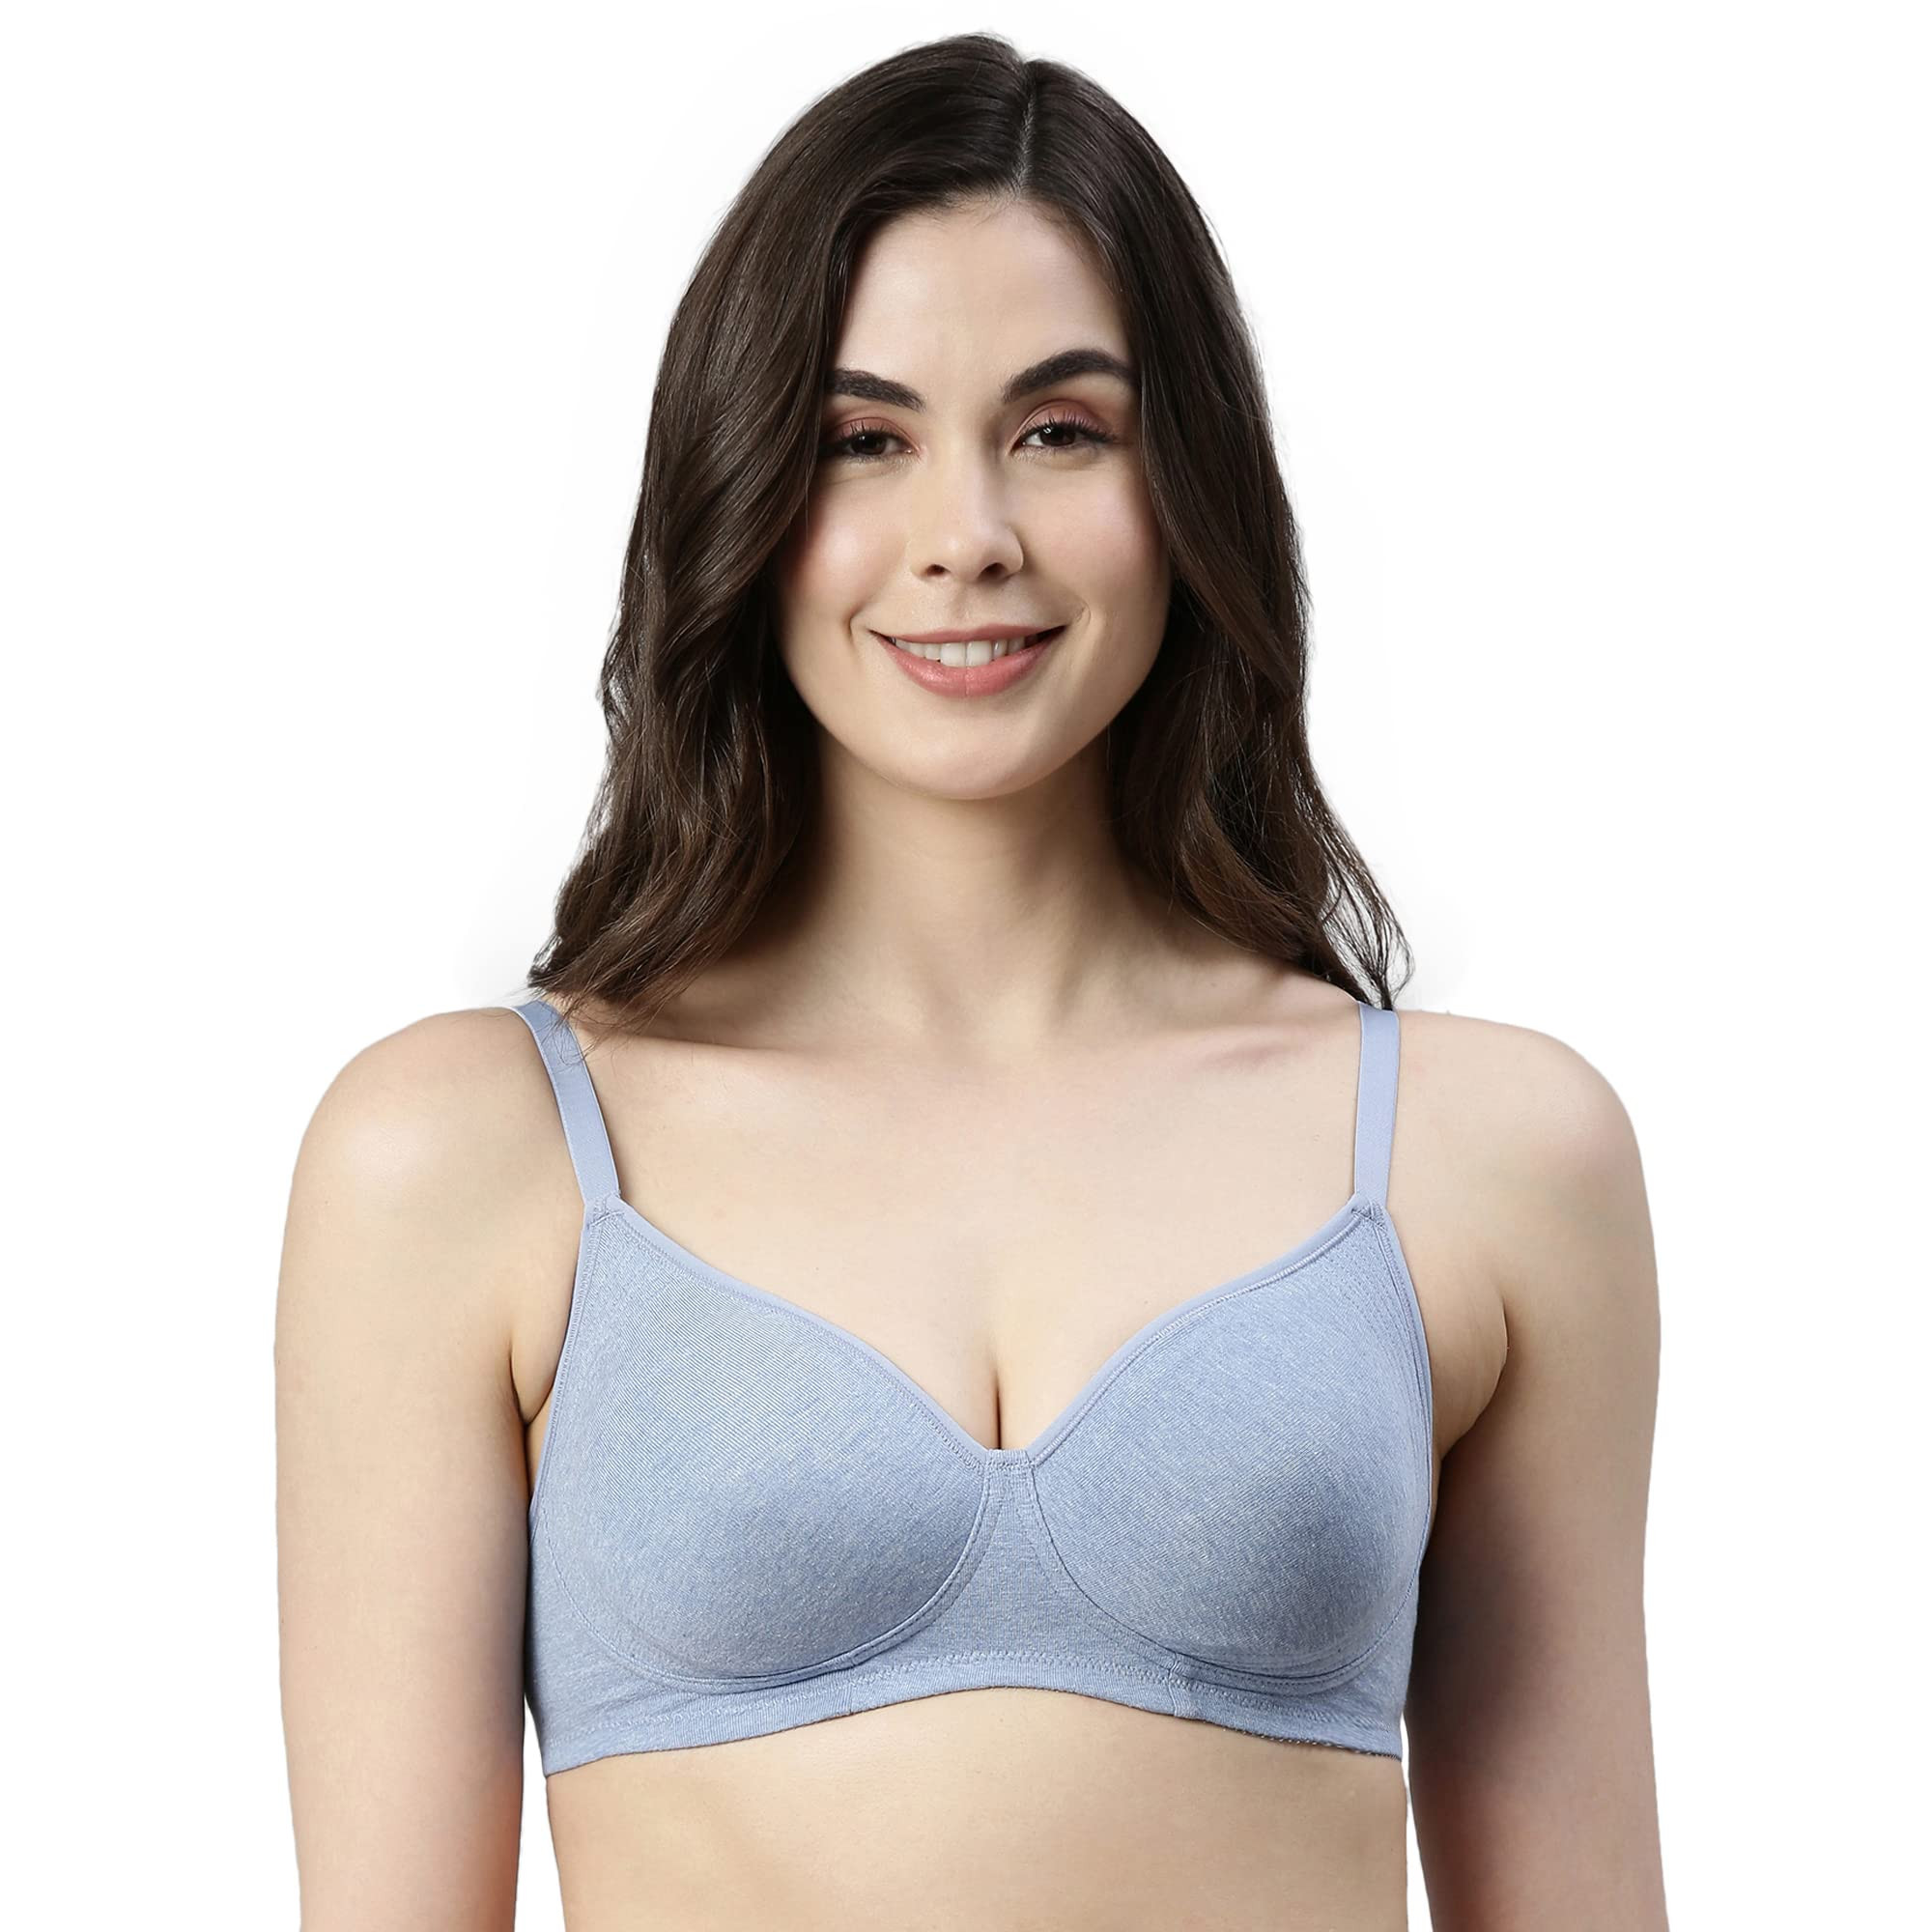 https://www.fastemi.com/uploads/fastemicom/products/enamor-a042-side-support-shaper-stretch-cotton-everyday-bra---non-padded-wire-free-amp-high-coveragesize-38z-162380436053755_l.jpg